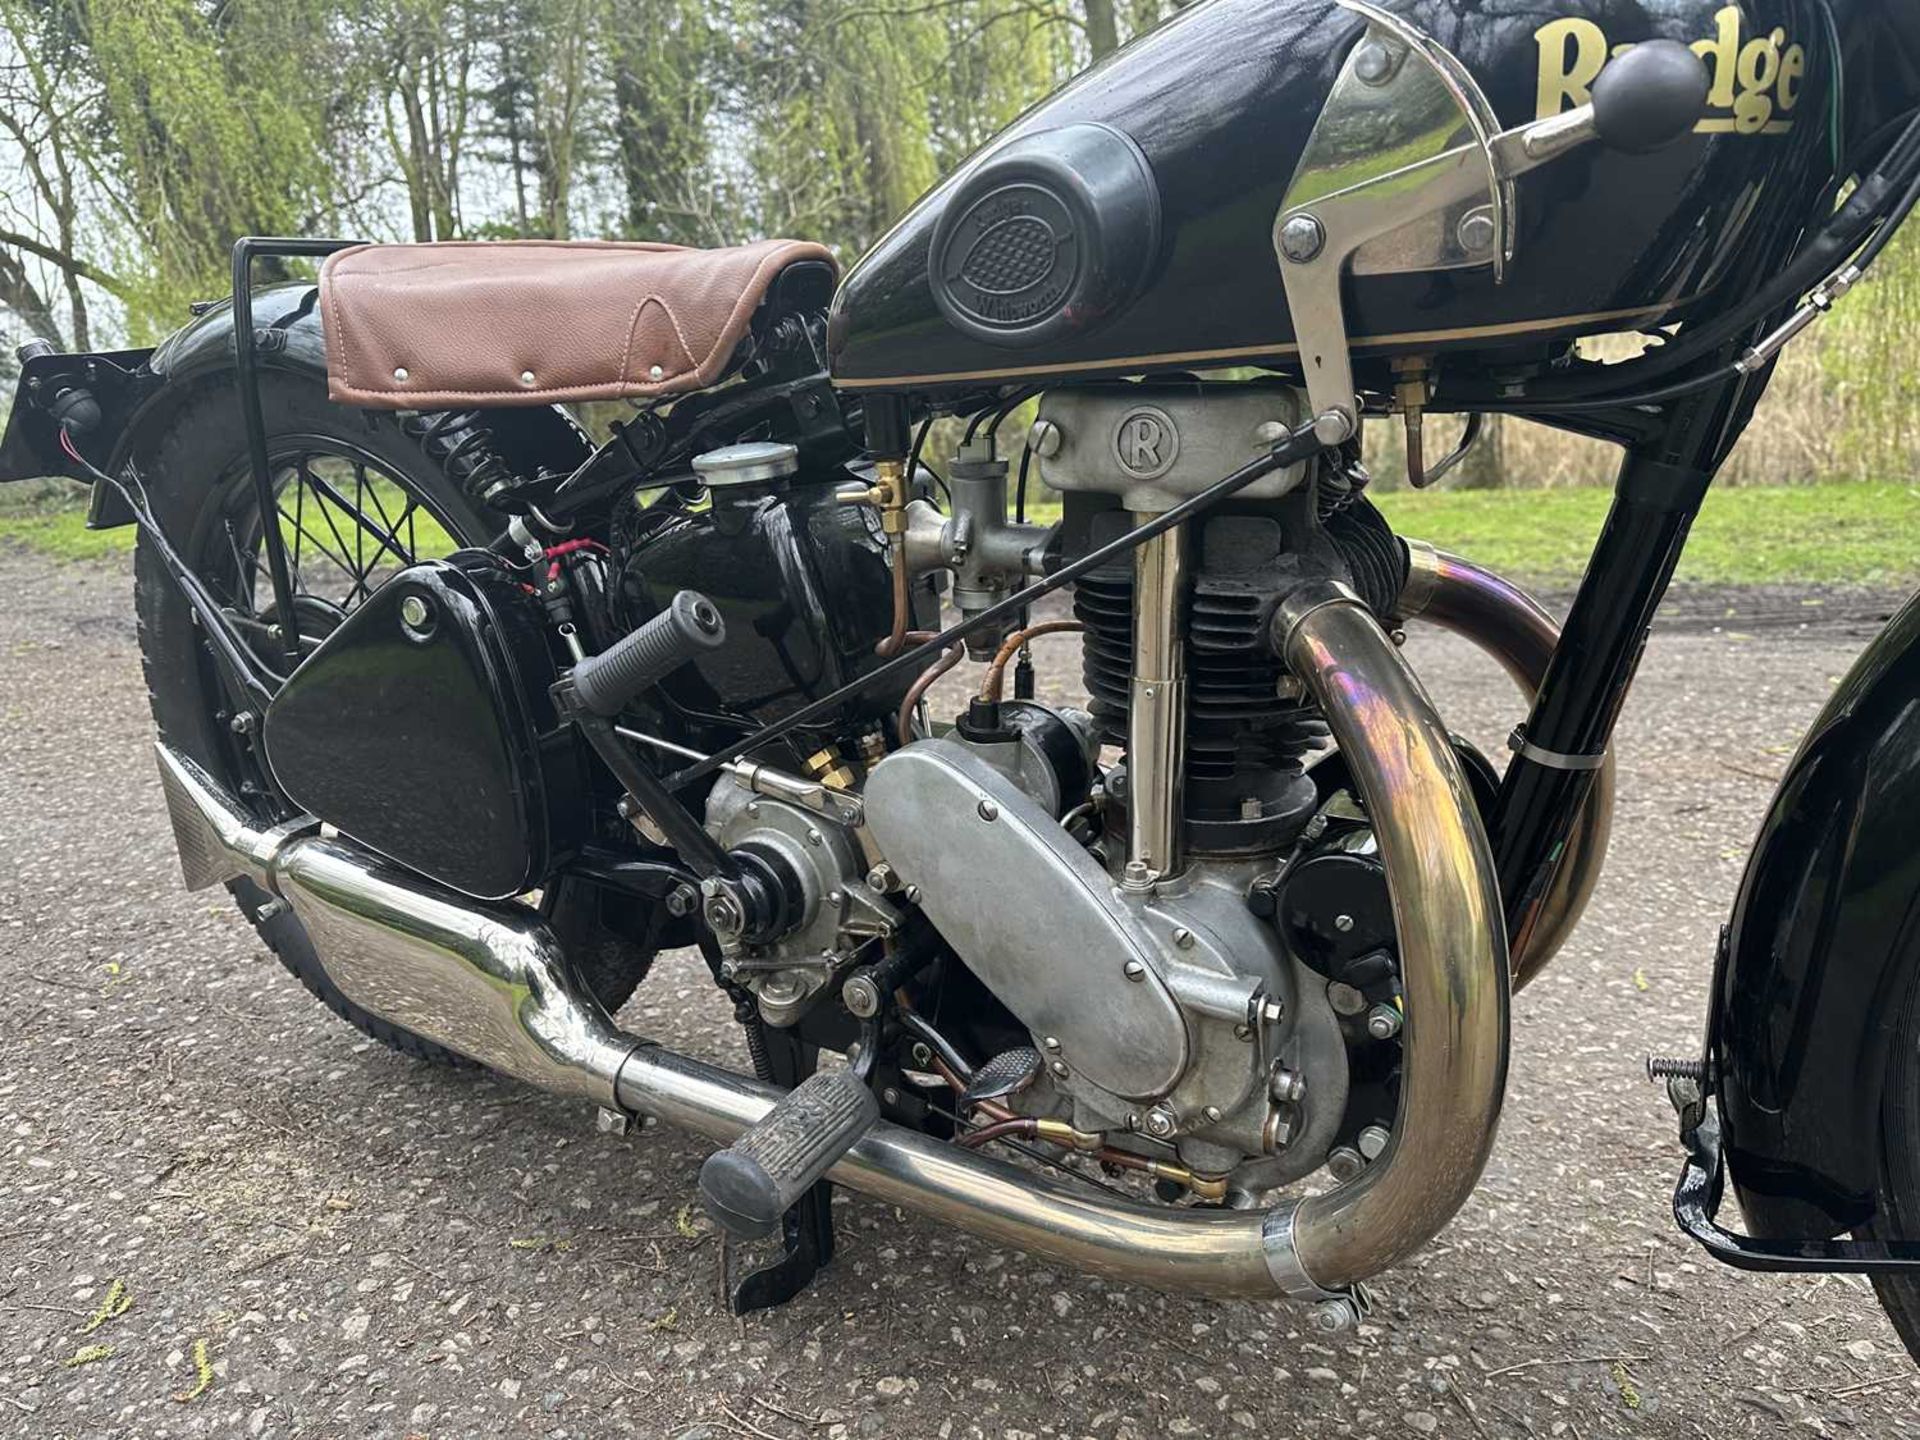 1931 Rudge 500 Special Equipped with a new stainless steel exhaust system - Image 6 of 8